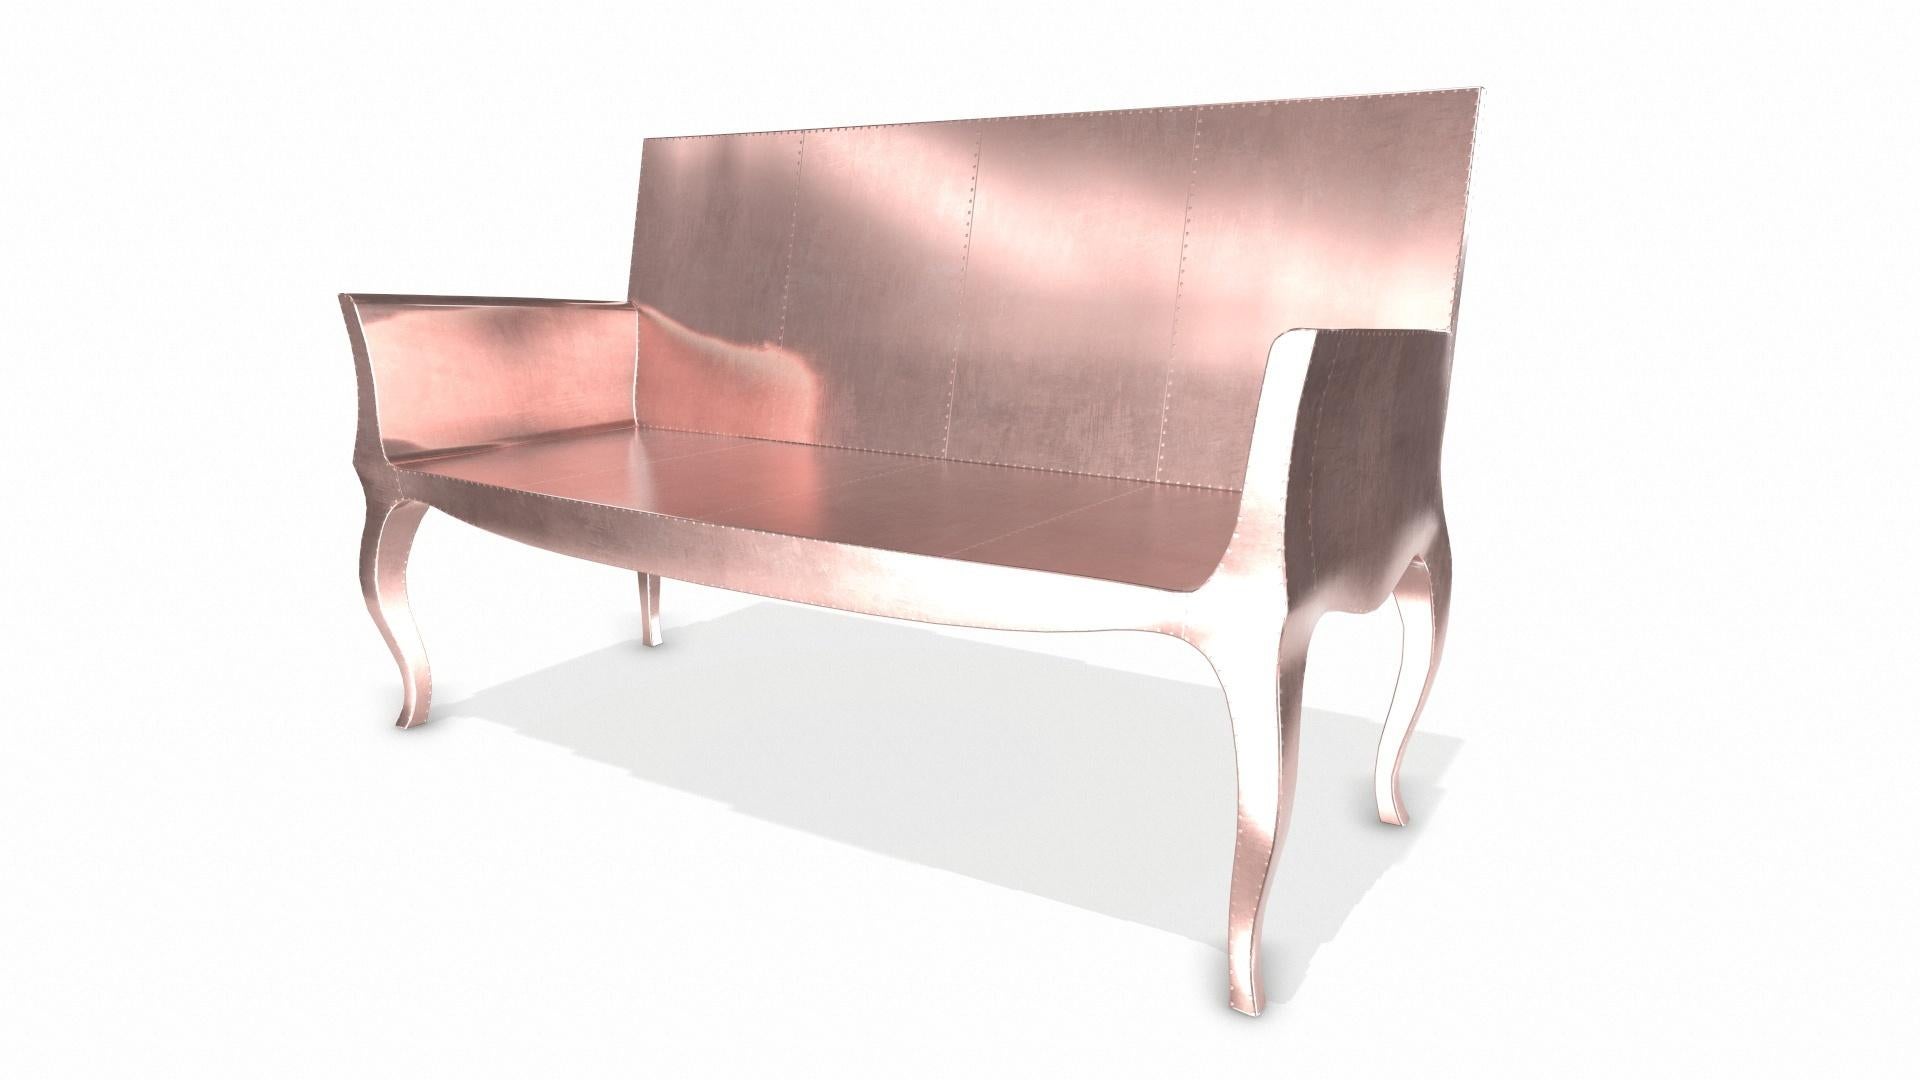 American Louise Settee Art Deco Canapes in Smooth Copper by Paul Mathieu for S Odegard For Sale